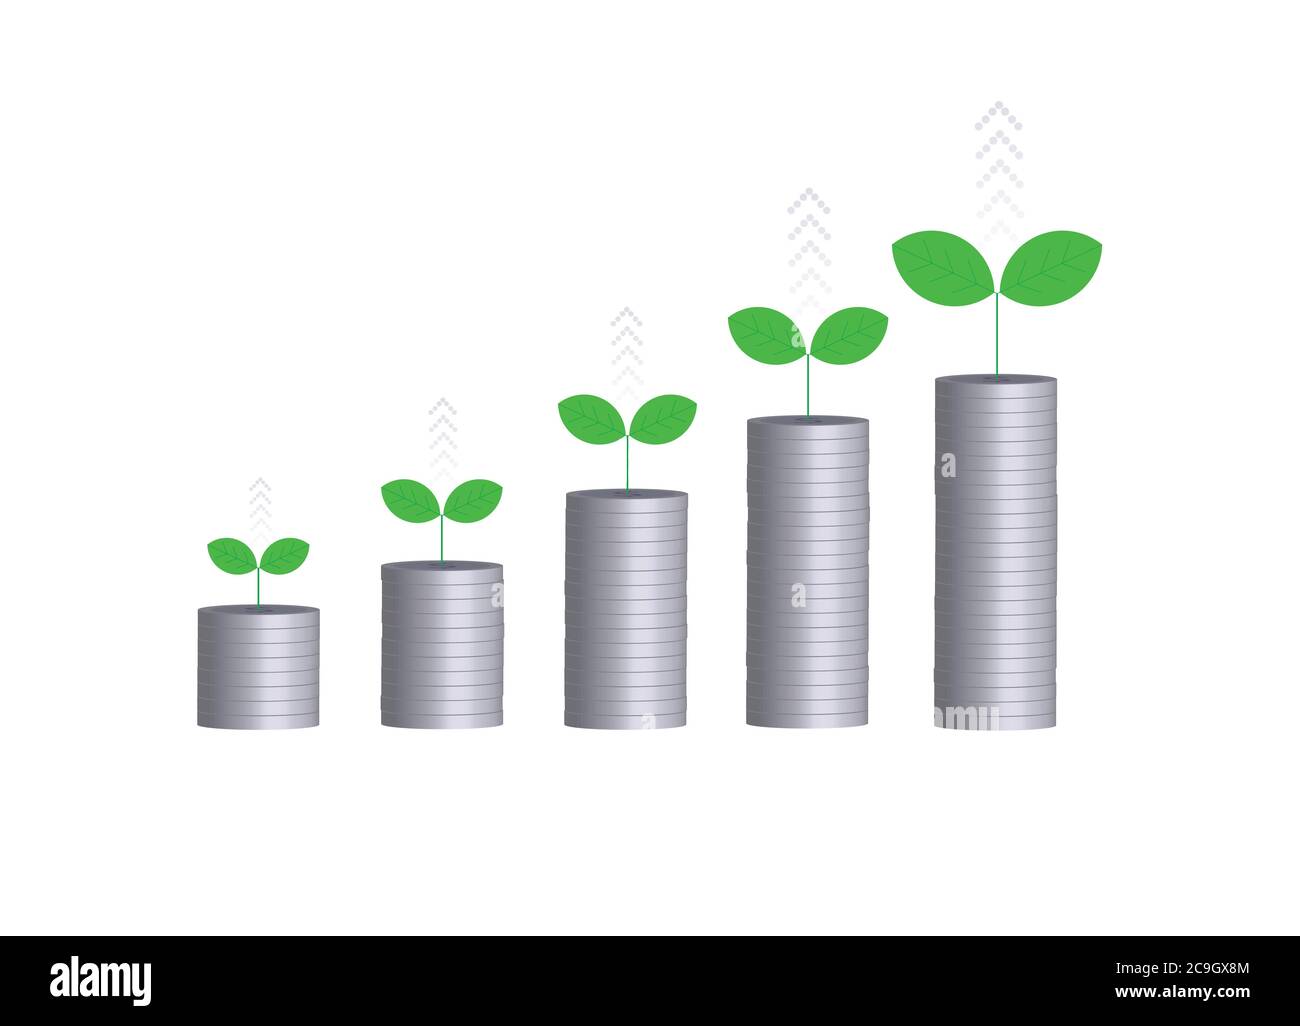 Silver coins arranged in a graph with there are trees on top. Stock Vector